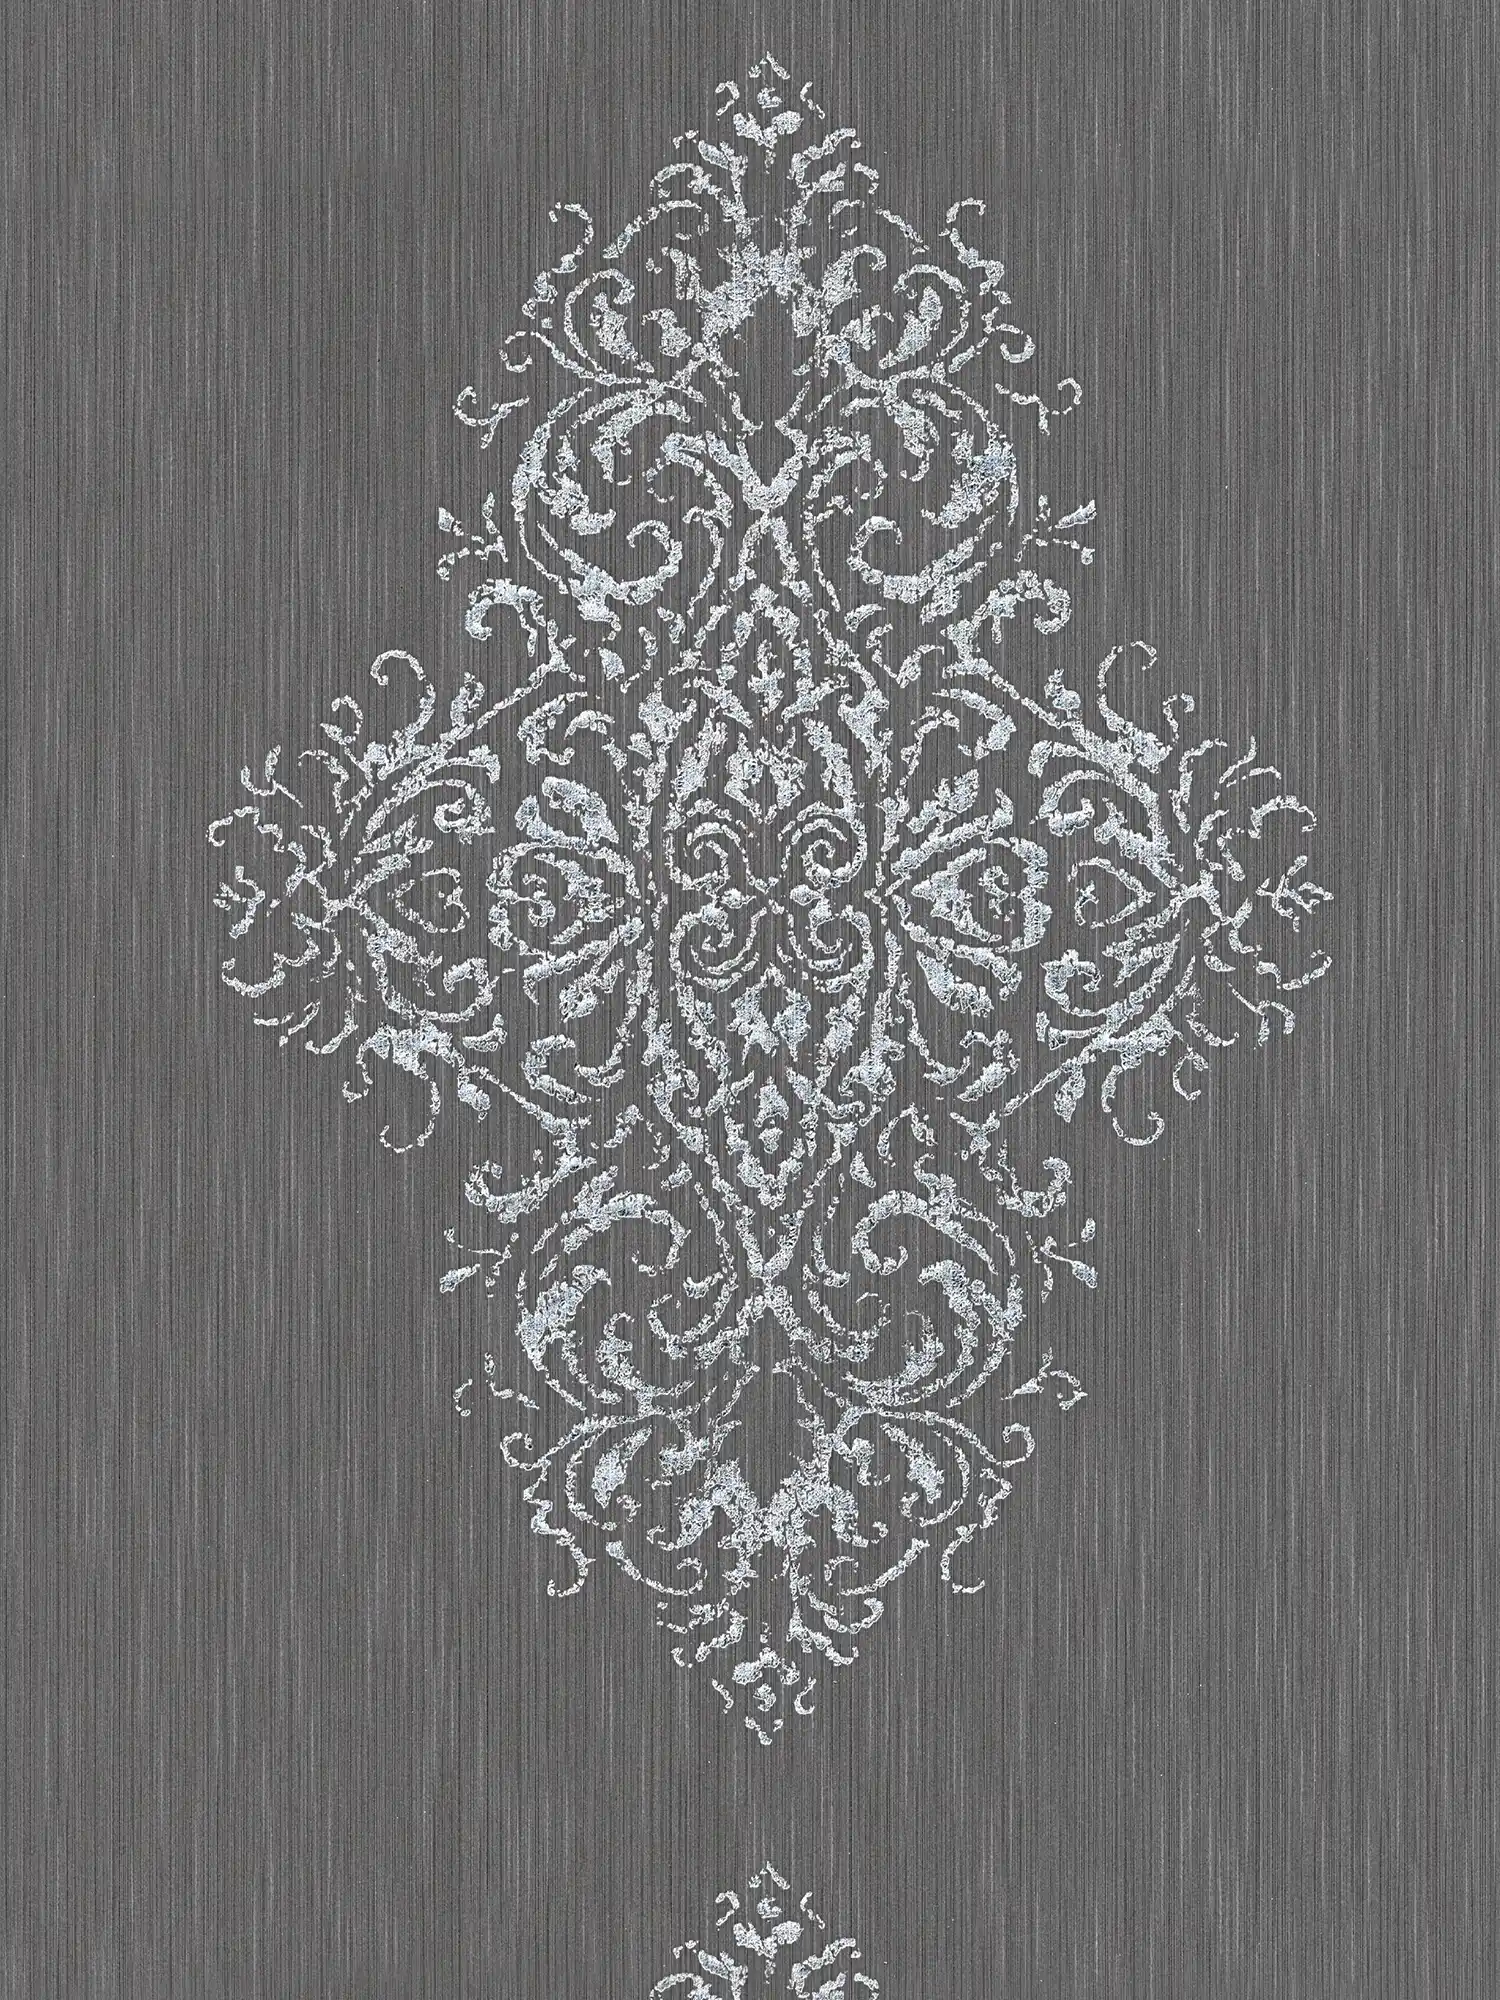 Ornament wallpaper with metallic effect in used look - blue, silver
